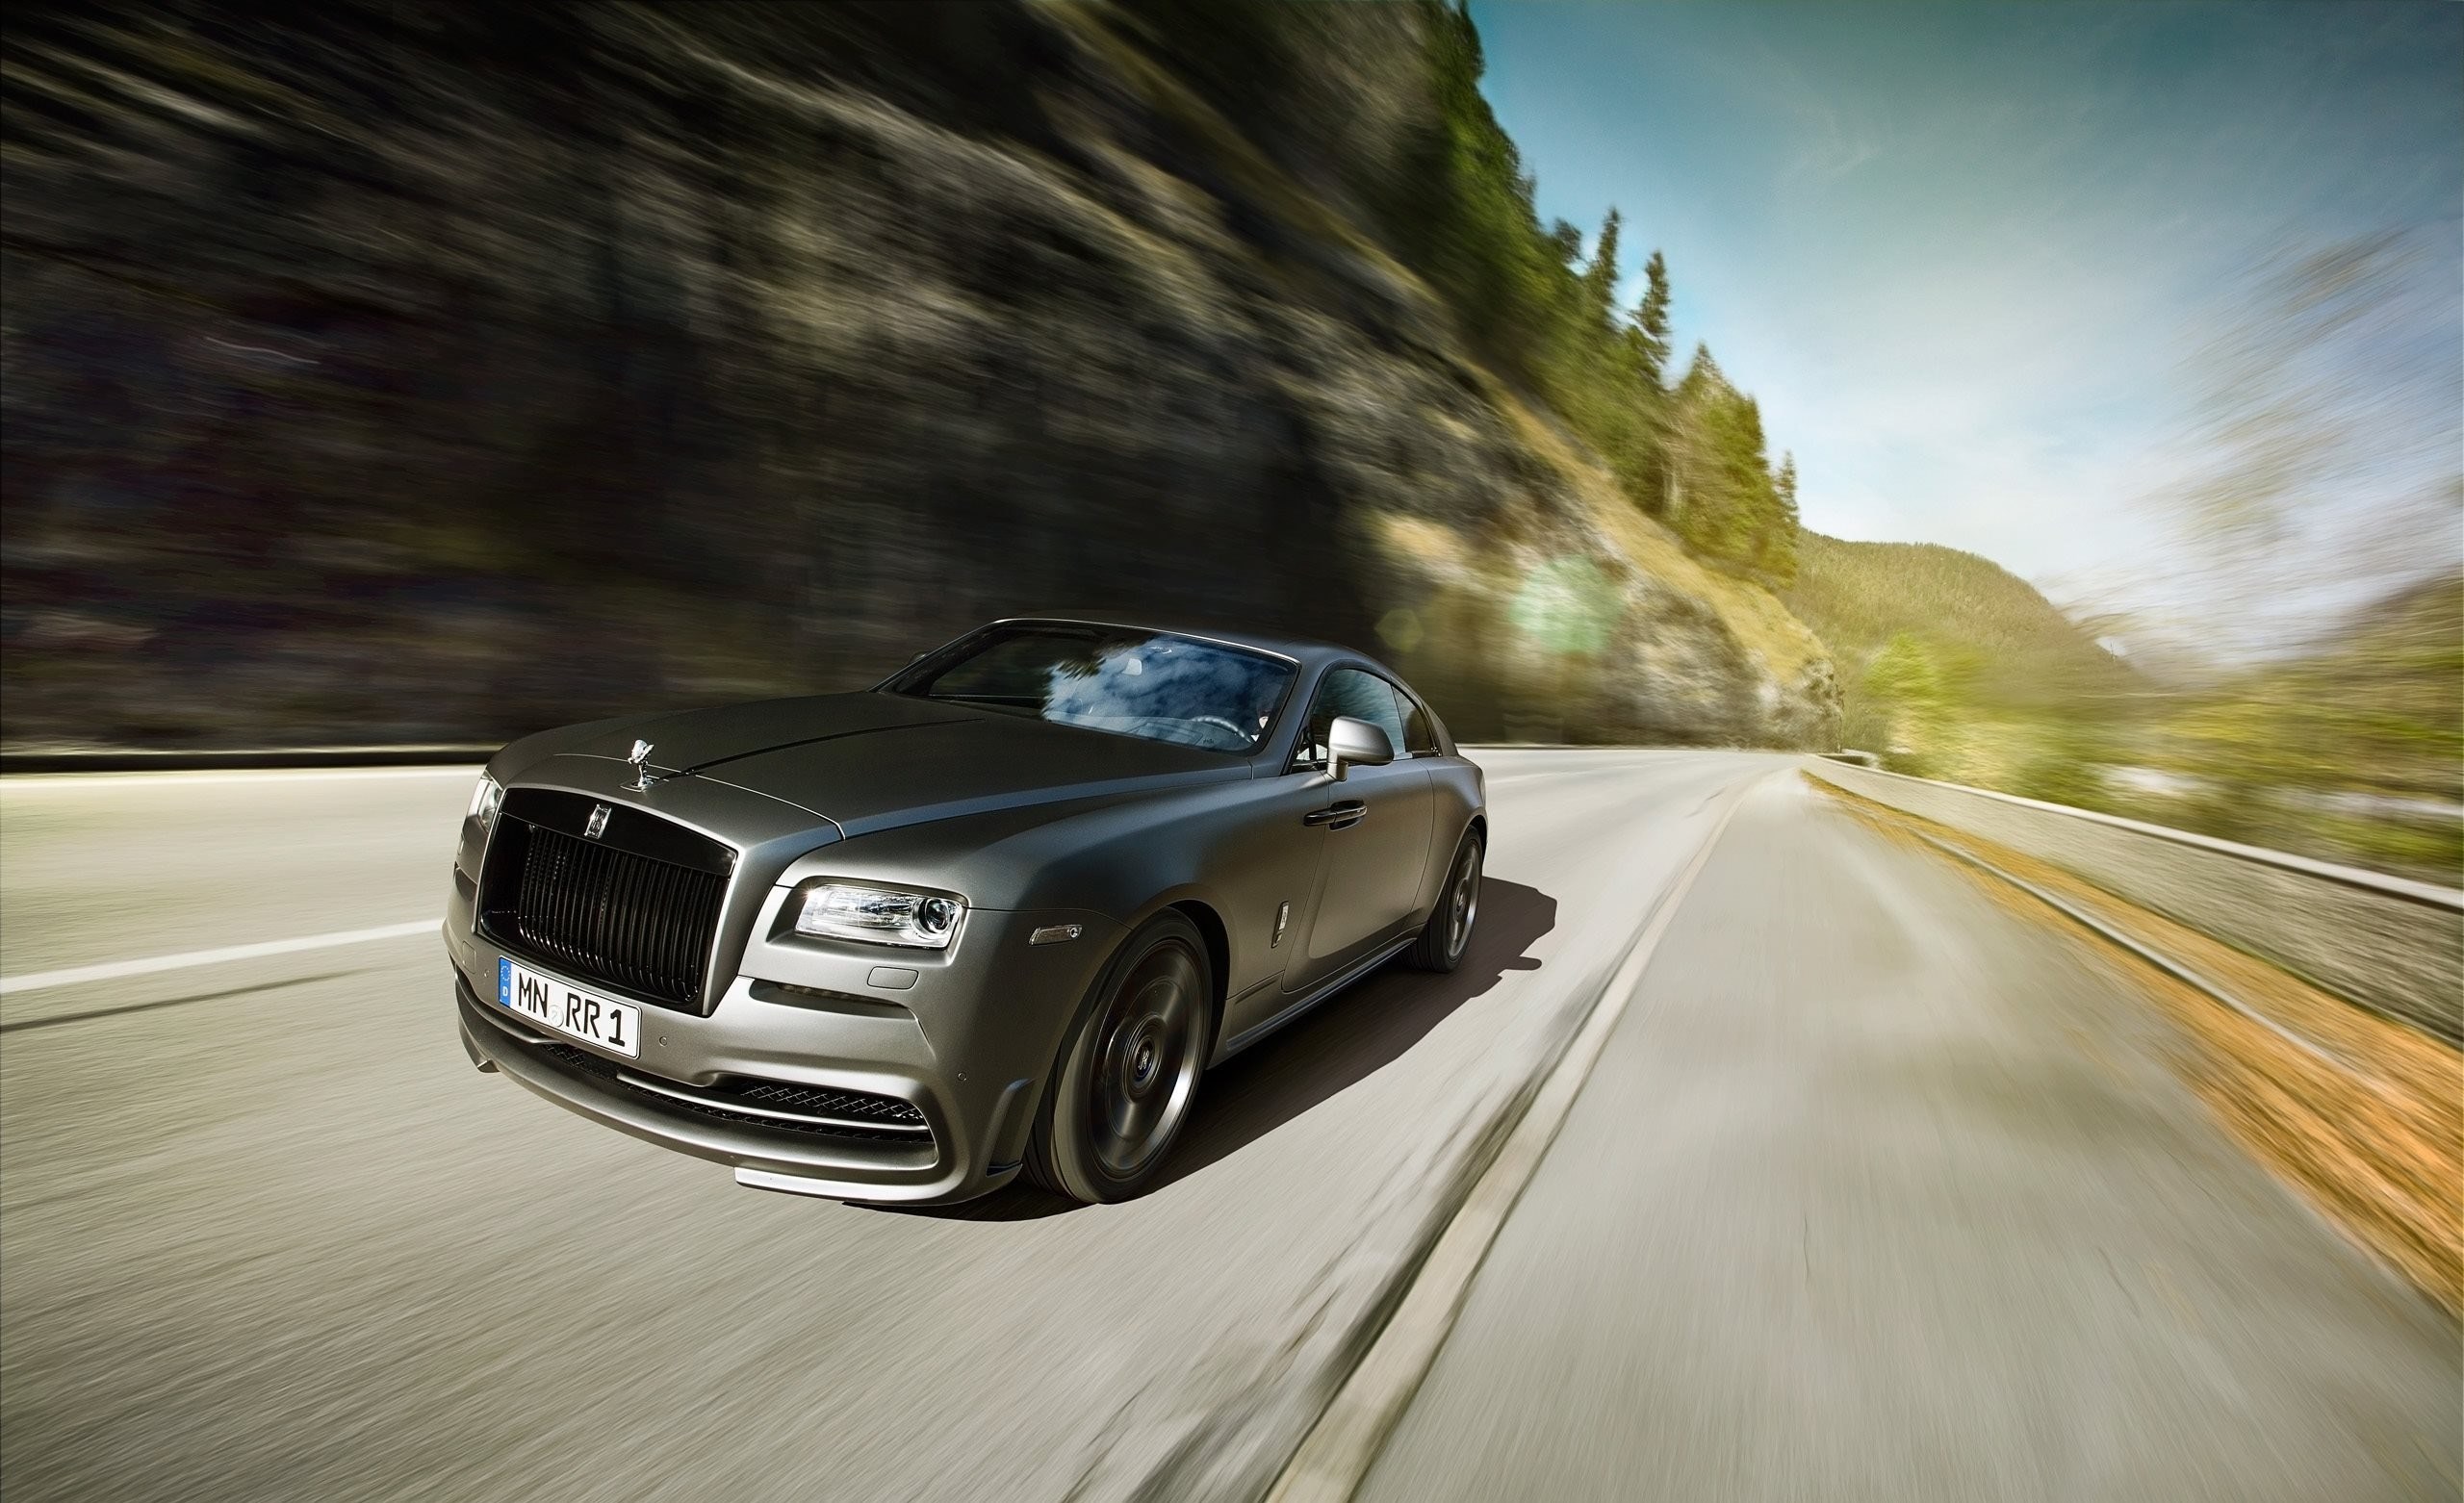 Free photo A gray Rolls Royce Wraith driving down a country road.